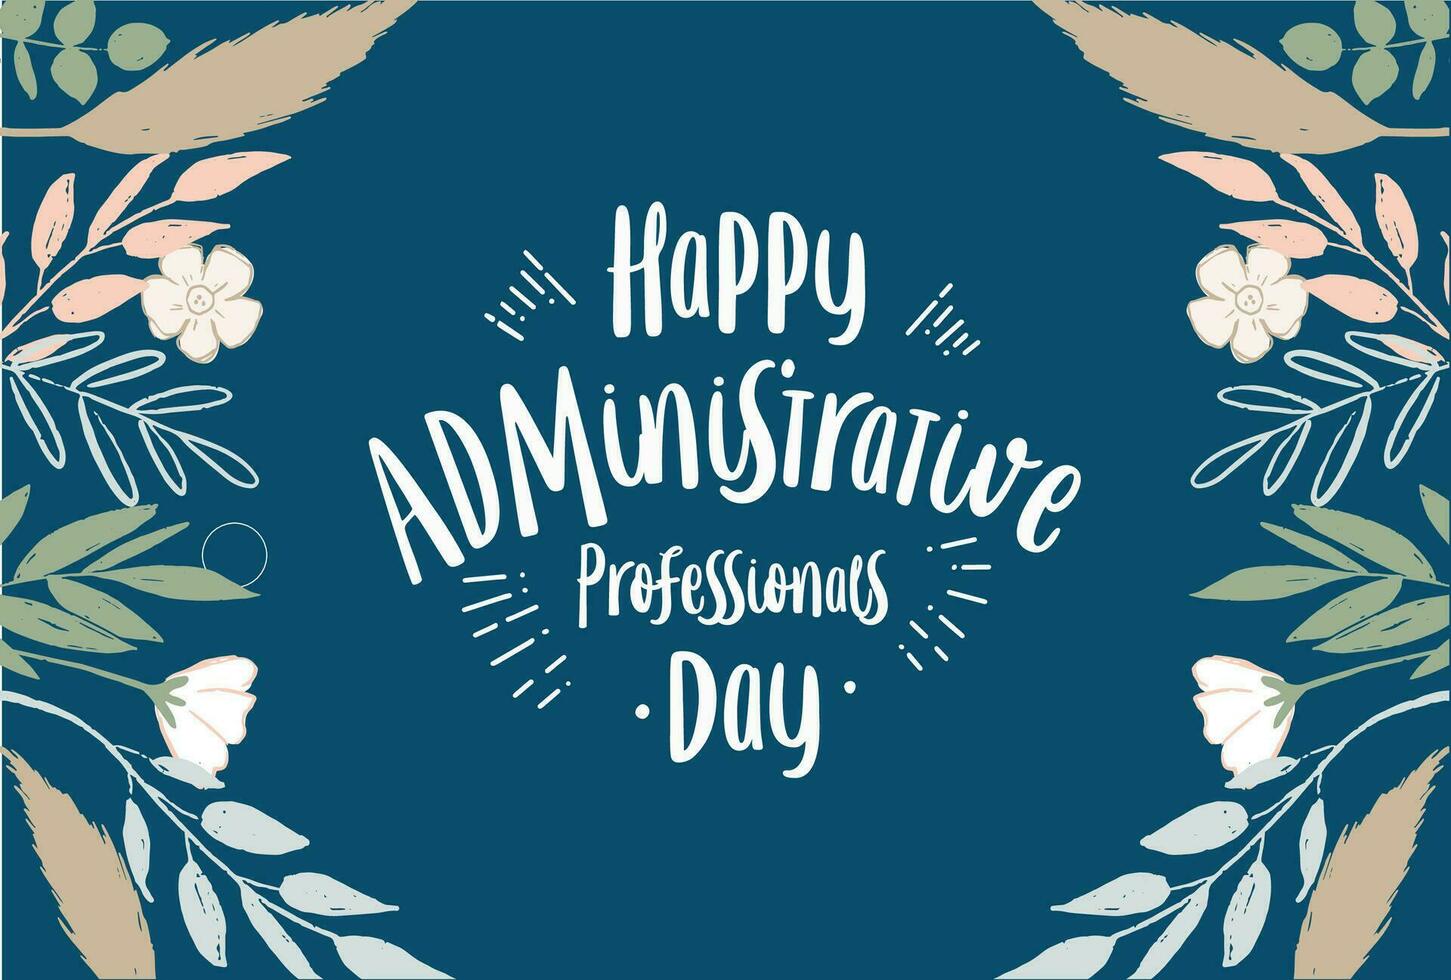 administrative professionals day, background template Holiday concept vector